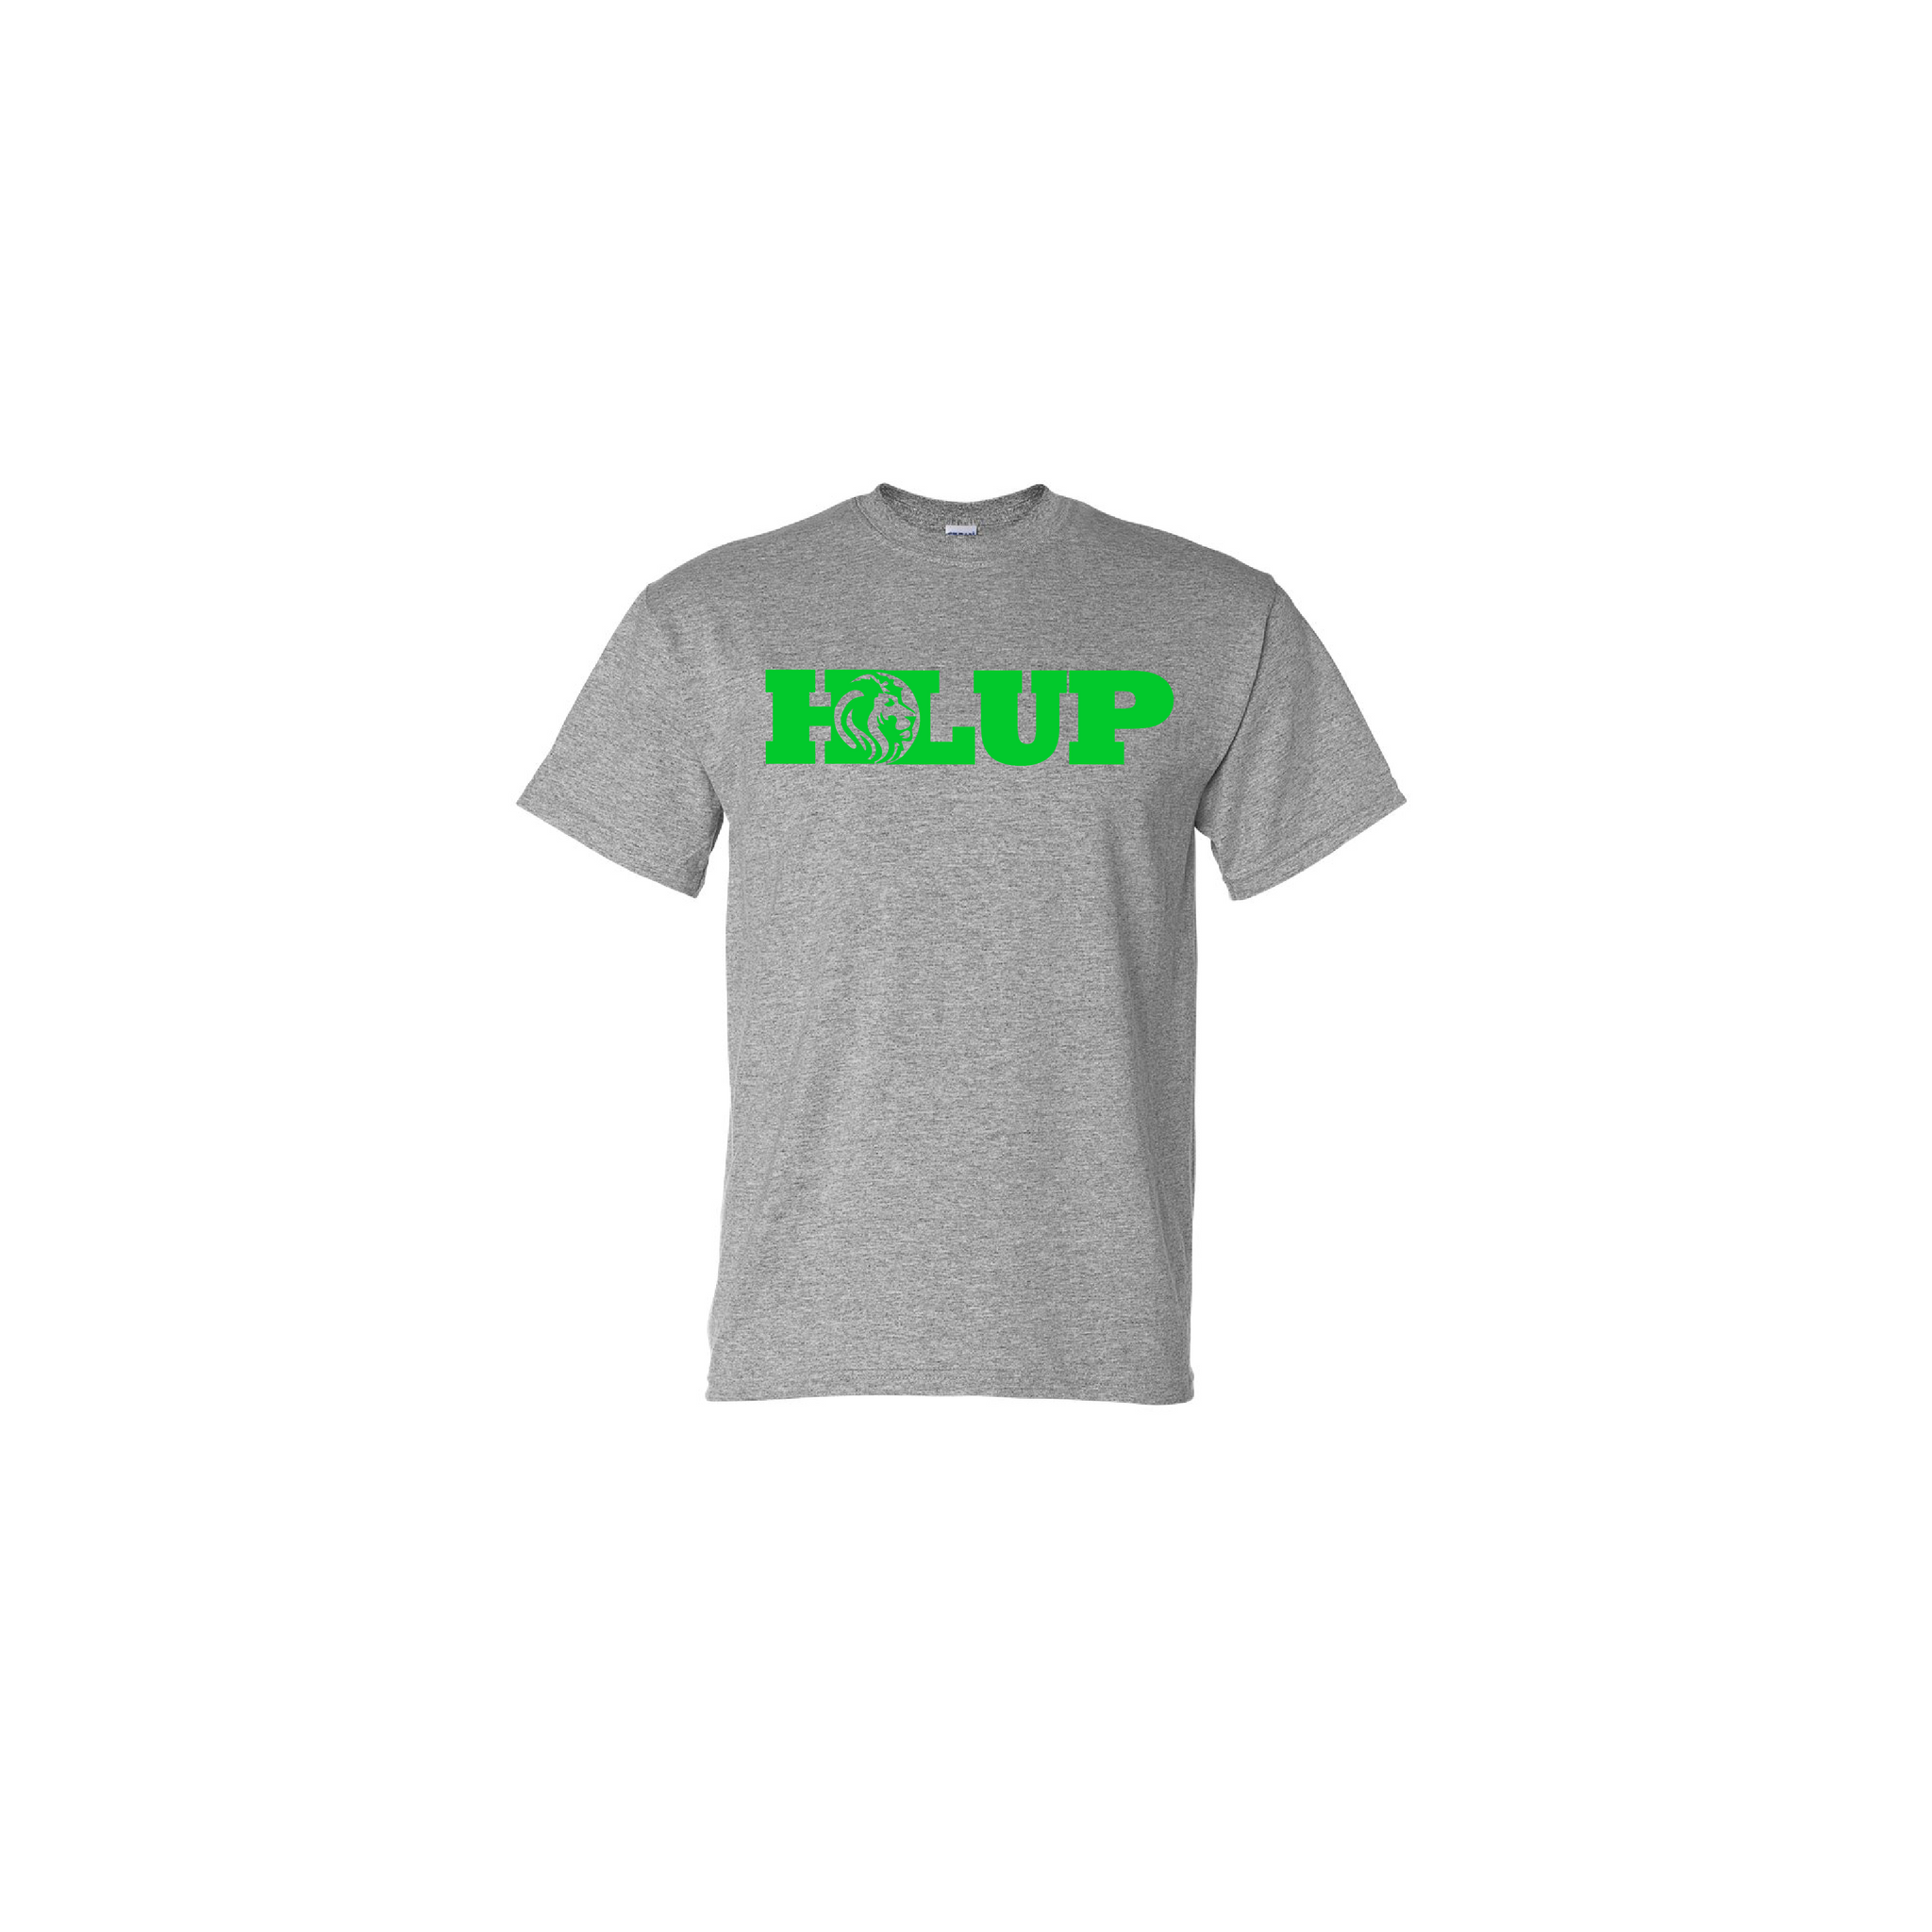 HOLUP OFFICIAL GRAY EDITION T-SHIRT